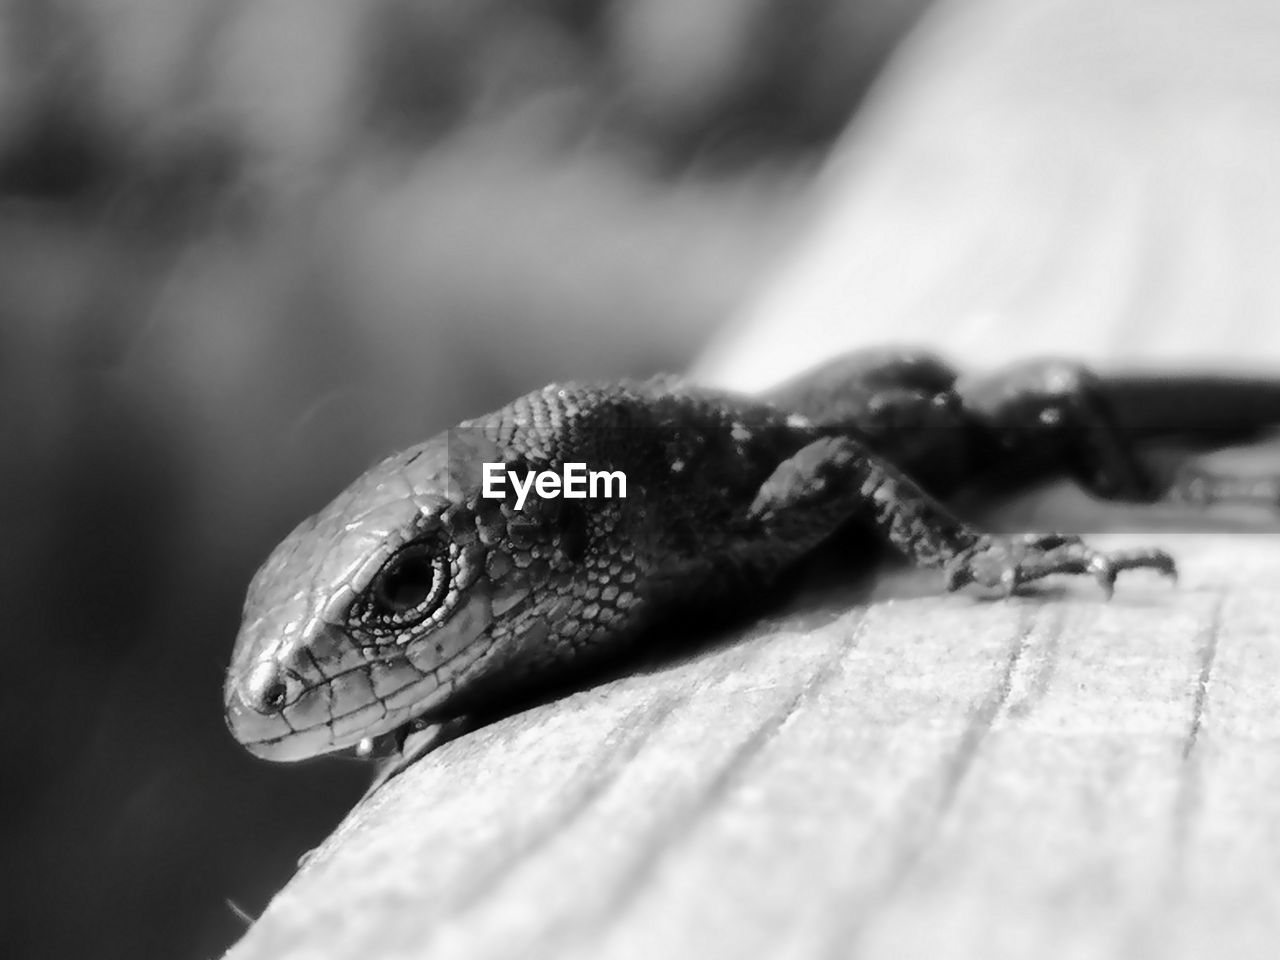 CLOSE-UP OF A LIZARD ON A WOOD